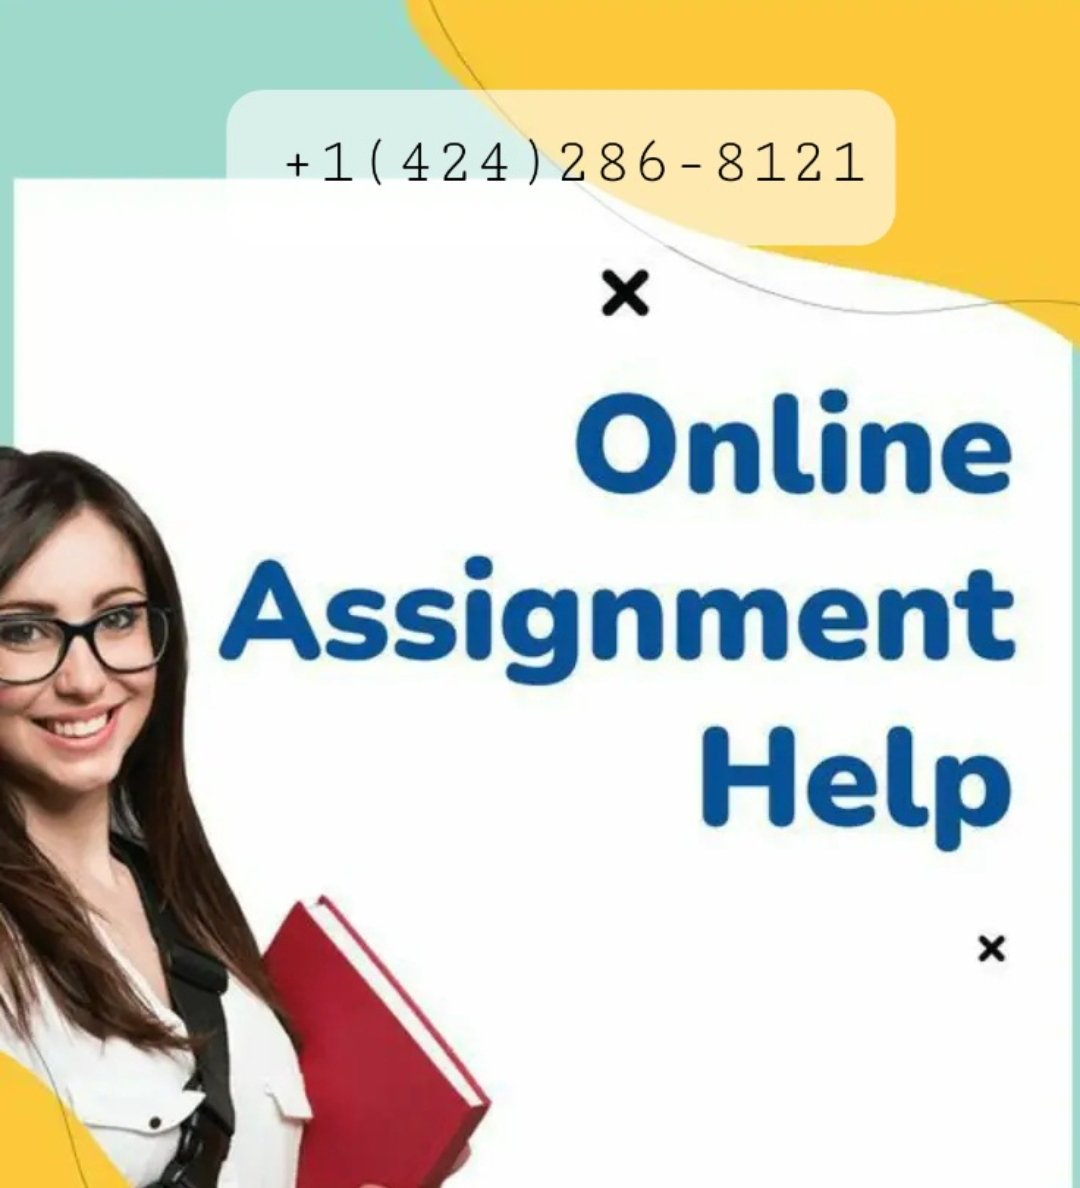 Place your orders for spring semester online classes help.
#easternmennoniteuniversity
#EasternIllinoisUniversity
#eastcarolinauniversity
#dukeuniversity
#duquesneuniversity
#drexeluniversity #drakeuniversity #universityofdenver